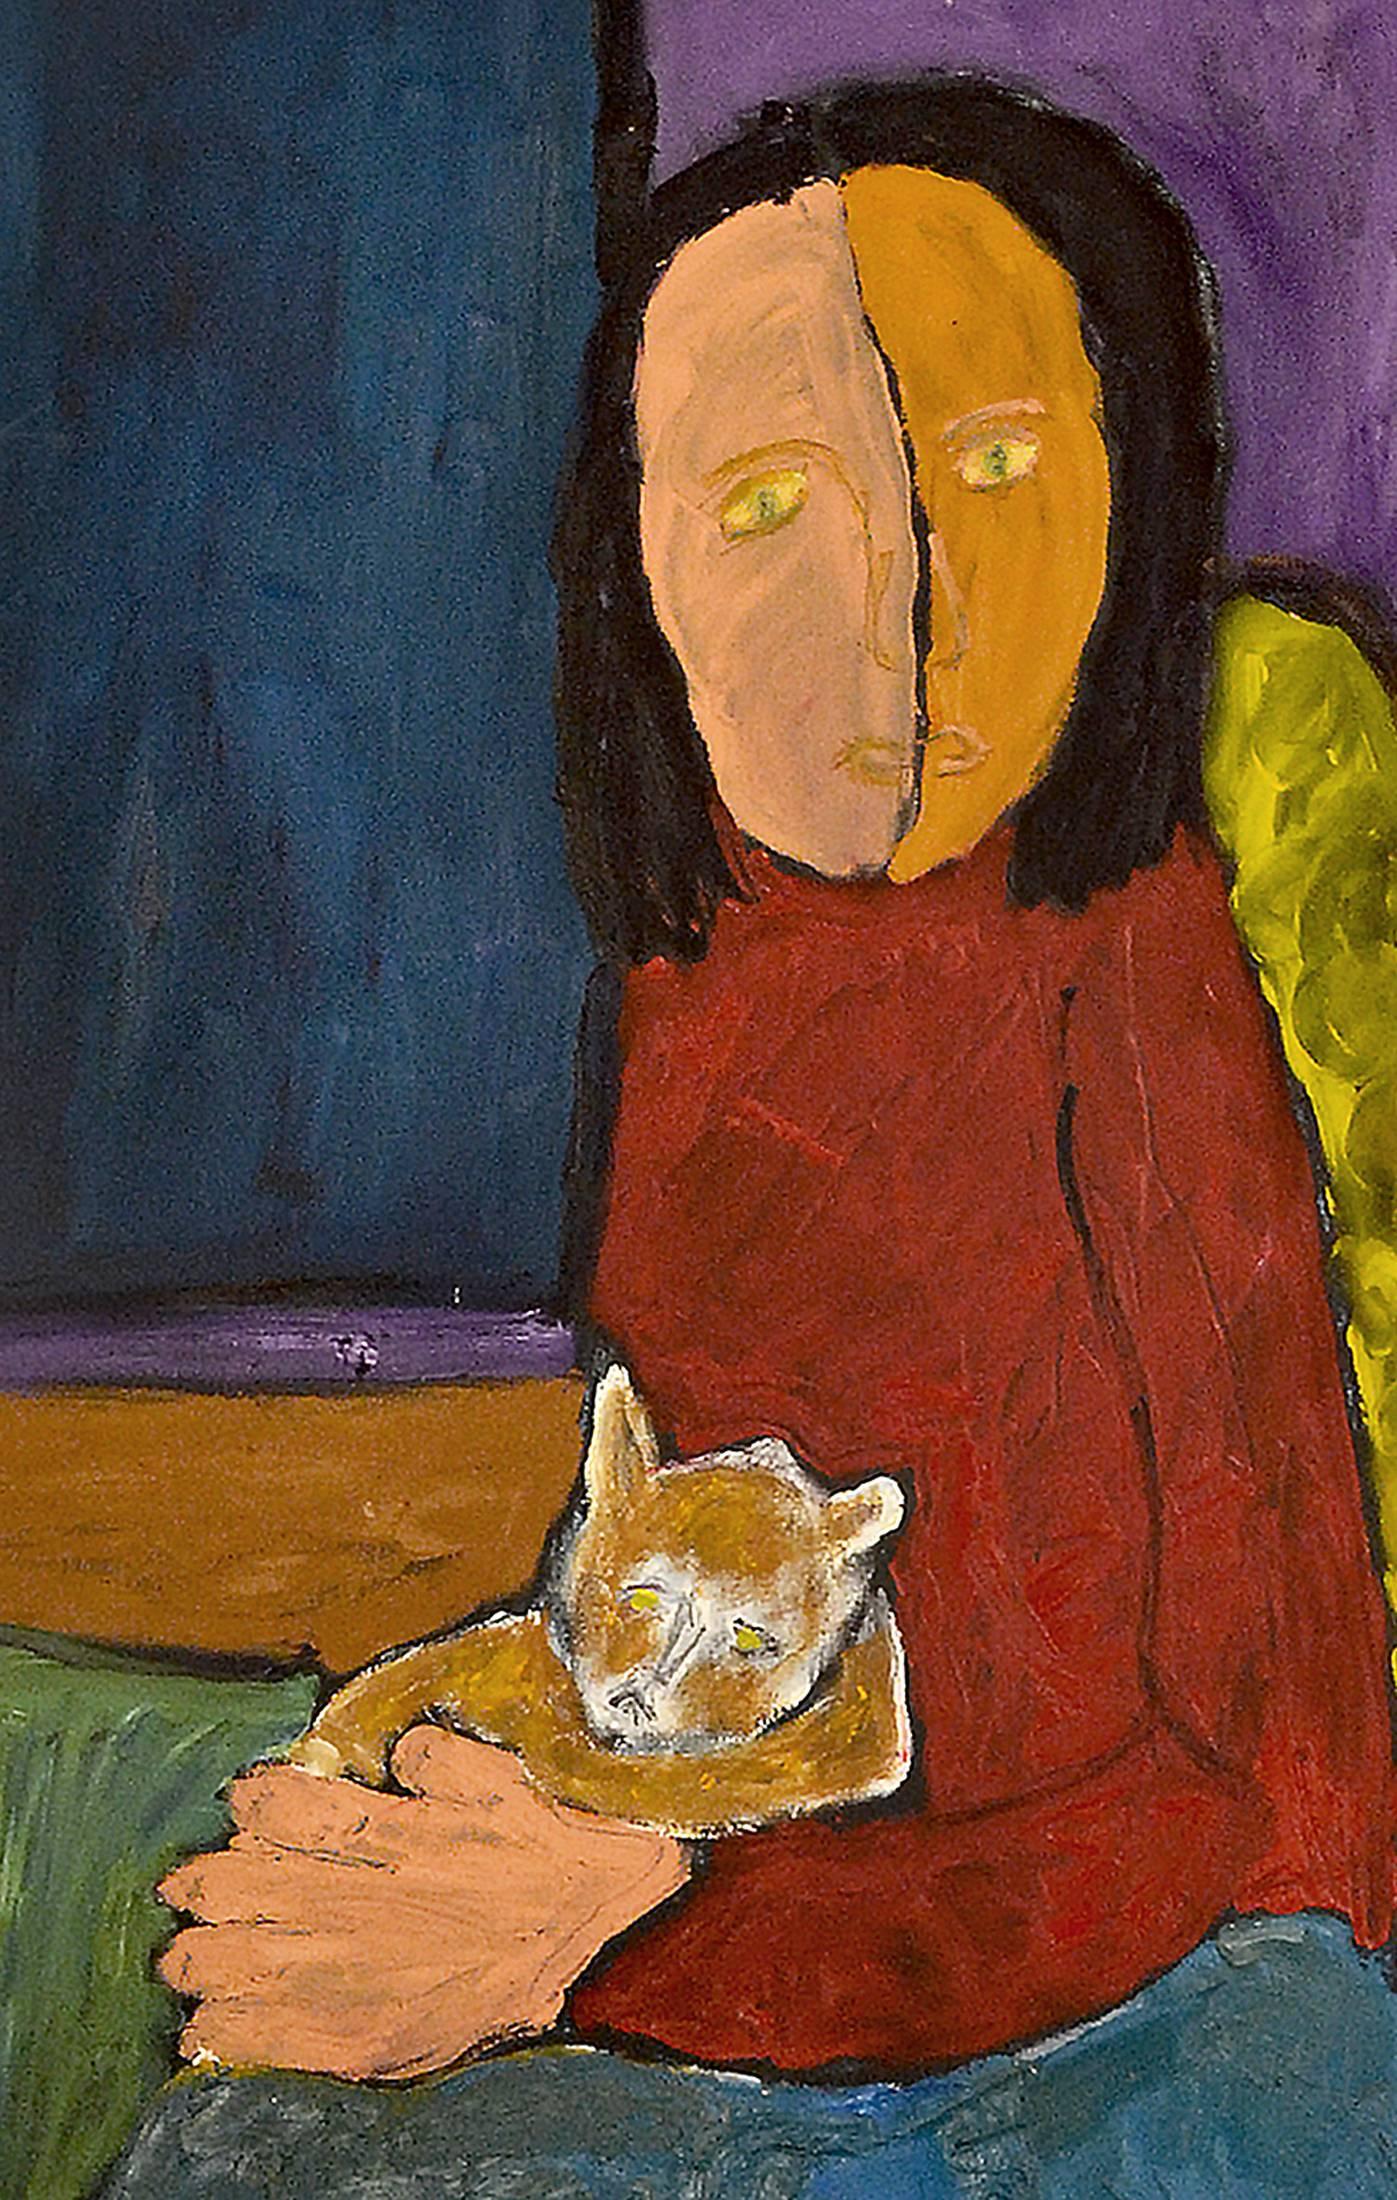 This exceptional painting titled abstract expressionist portrait of woman with Cat, artist no 714 is by highly listed and respected self-taught artist JoAnne Fleming (b. 1930). The artist's characteristic style exudes a primitive quality to each and